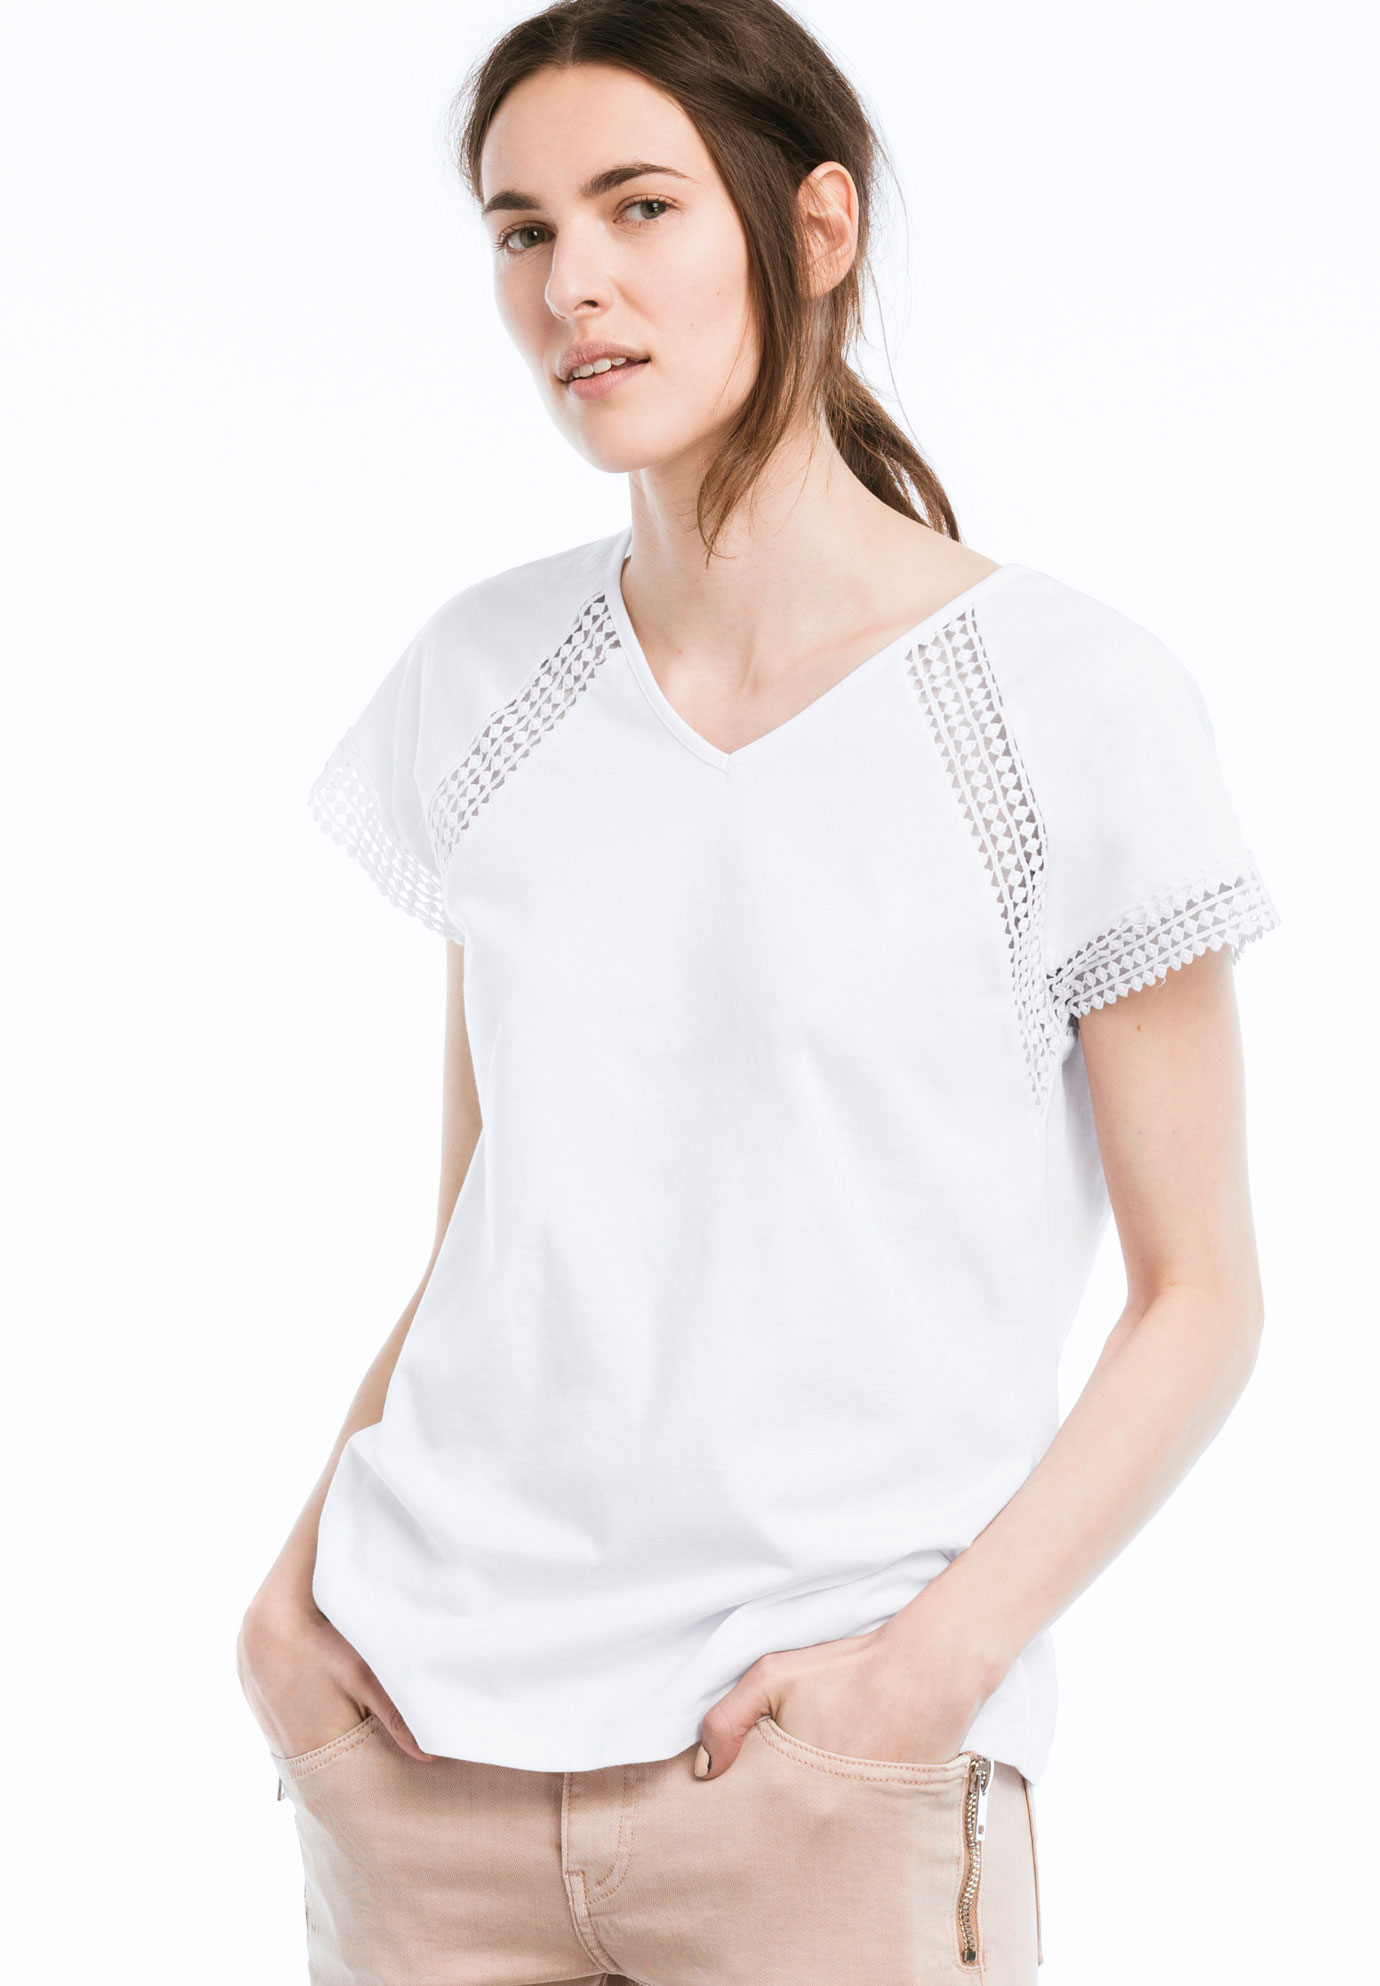 Crochet Trim Tee by ellos®| Plus Size Tops | Woman Within